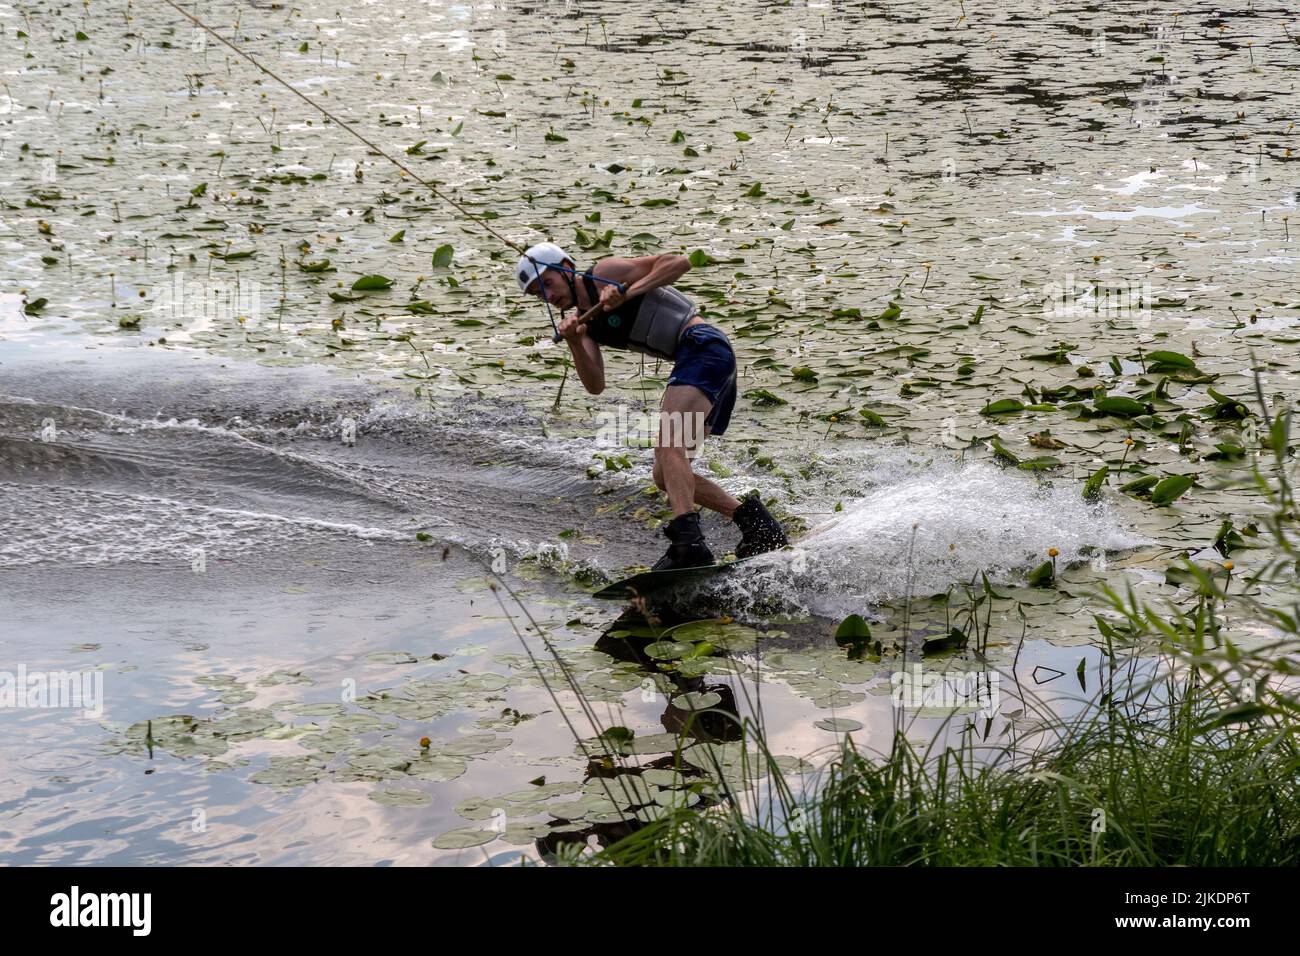 Yaroslavl, Russia. 23rd  July, 2022: A man is engaged in wakeboarding on the Volga River in the city of Yaroslavl, Russia Stock Photo